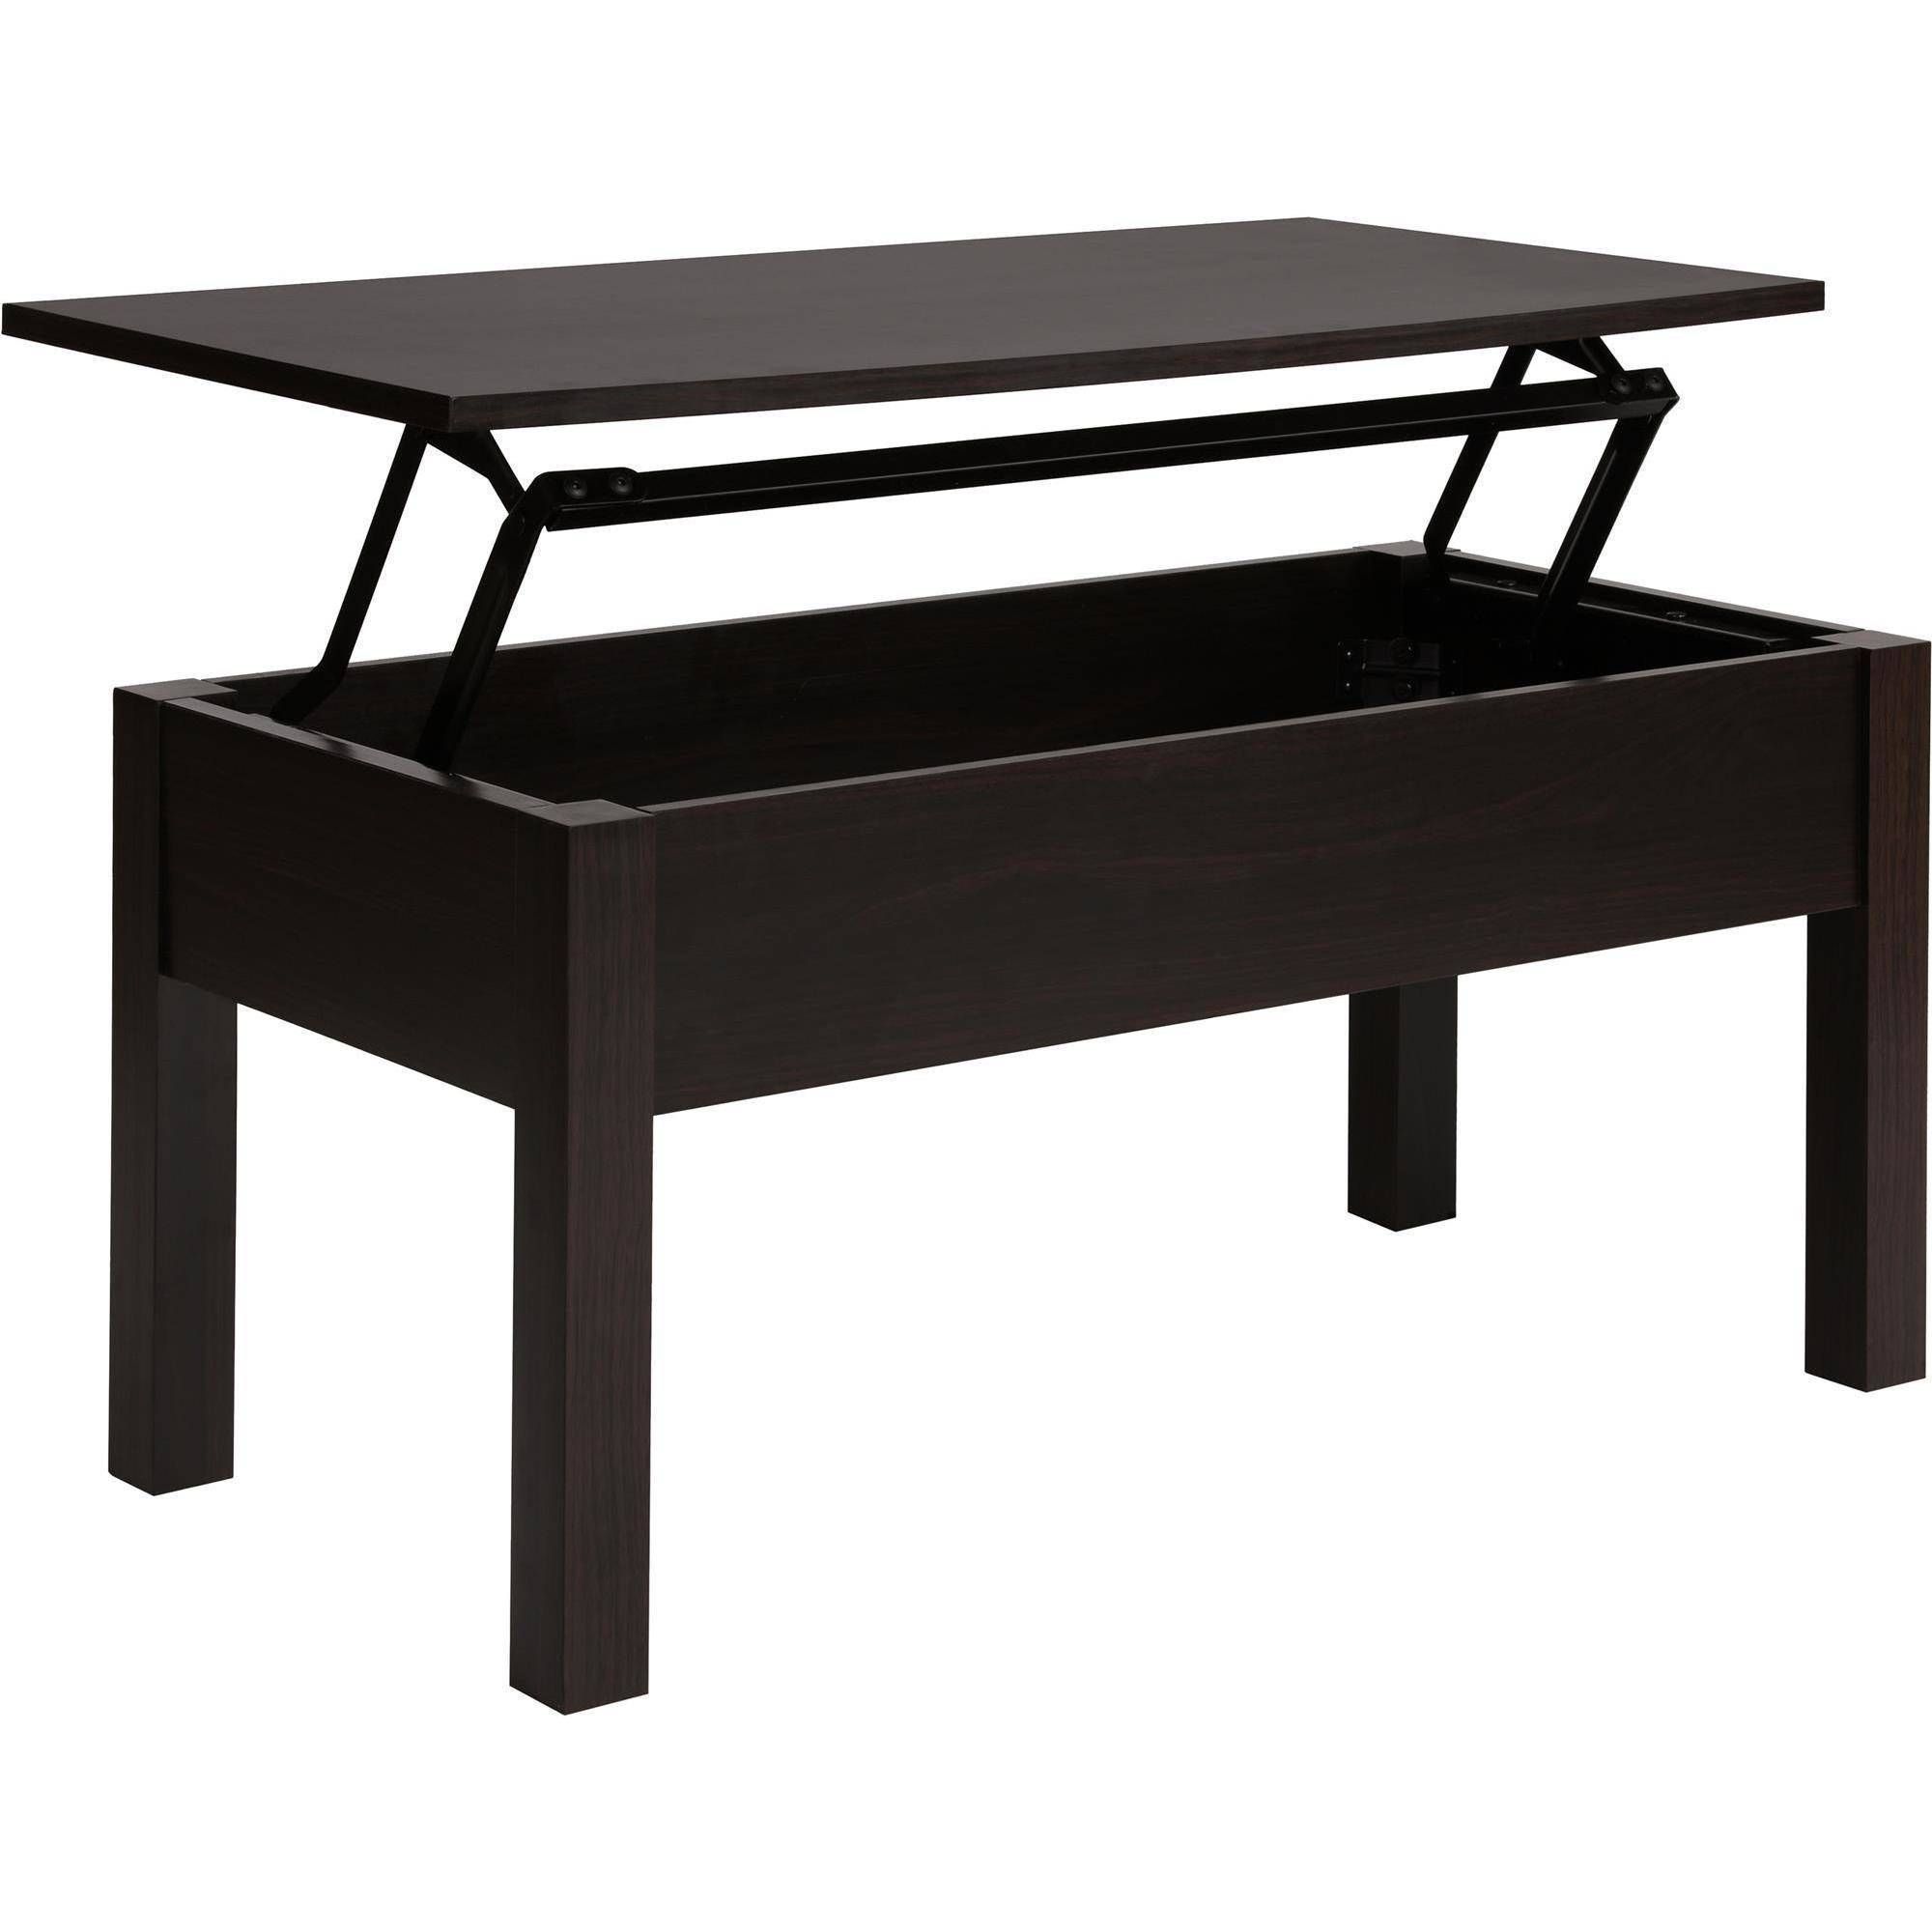 Mainstays Lift Top Coffee Table, Multiple Colors – Walmart For Top Lift Coffee Tables (View 1 of 30)